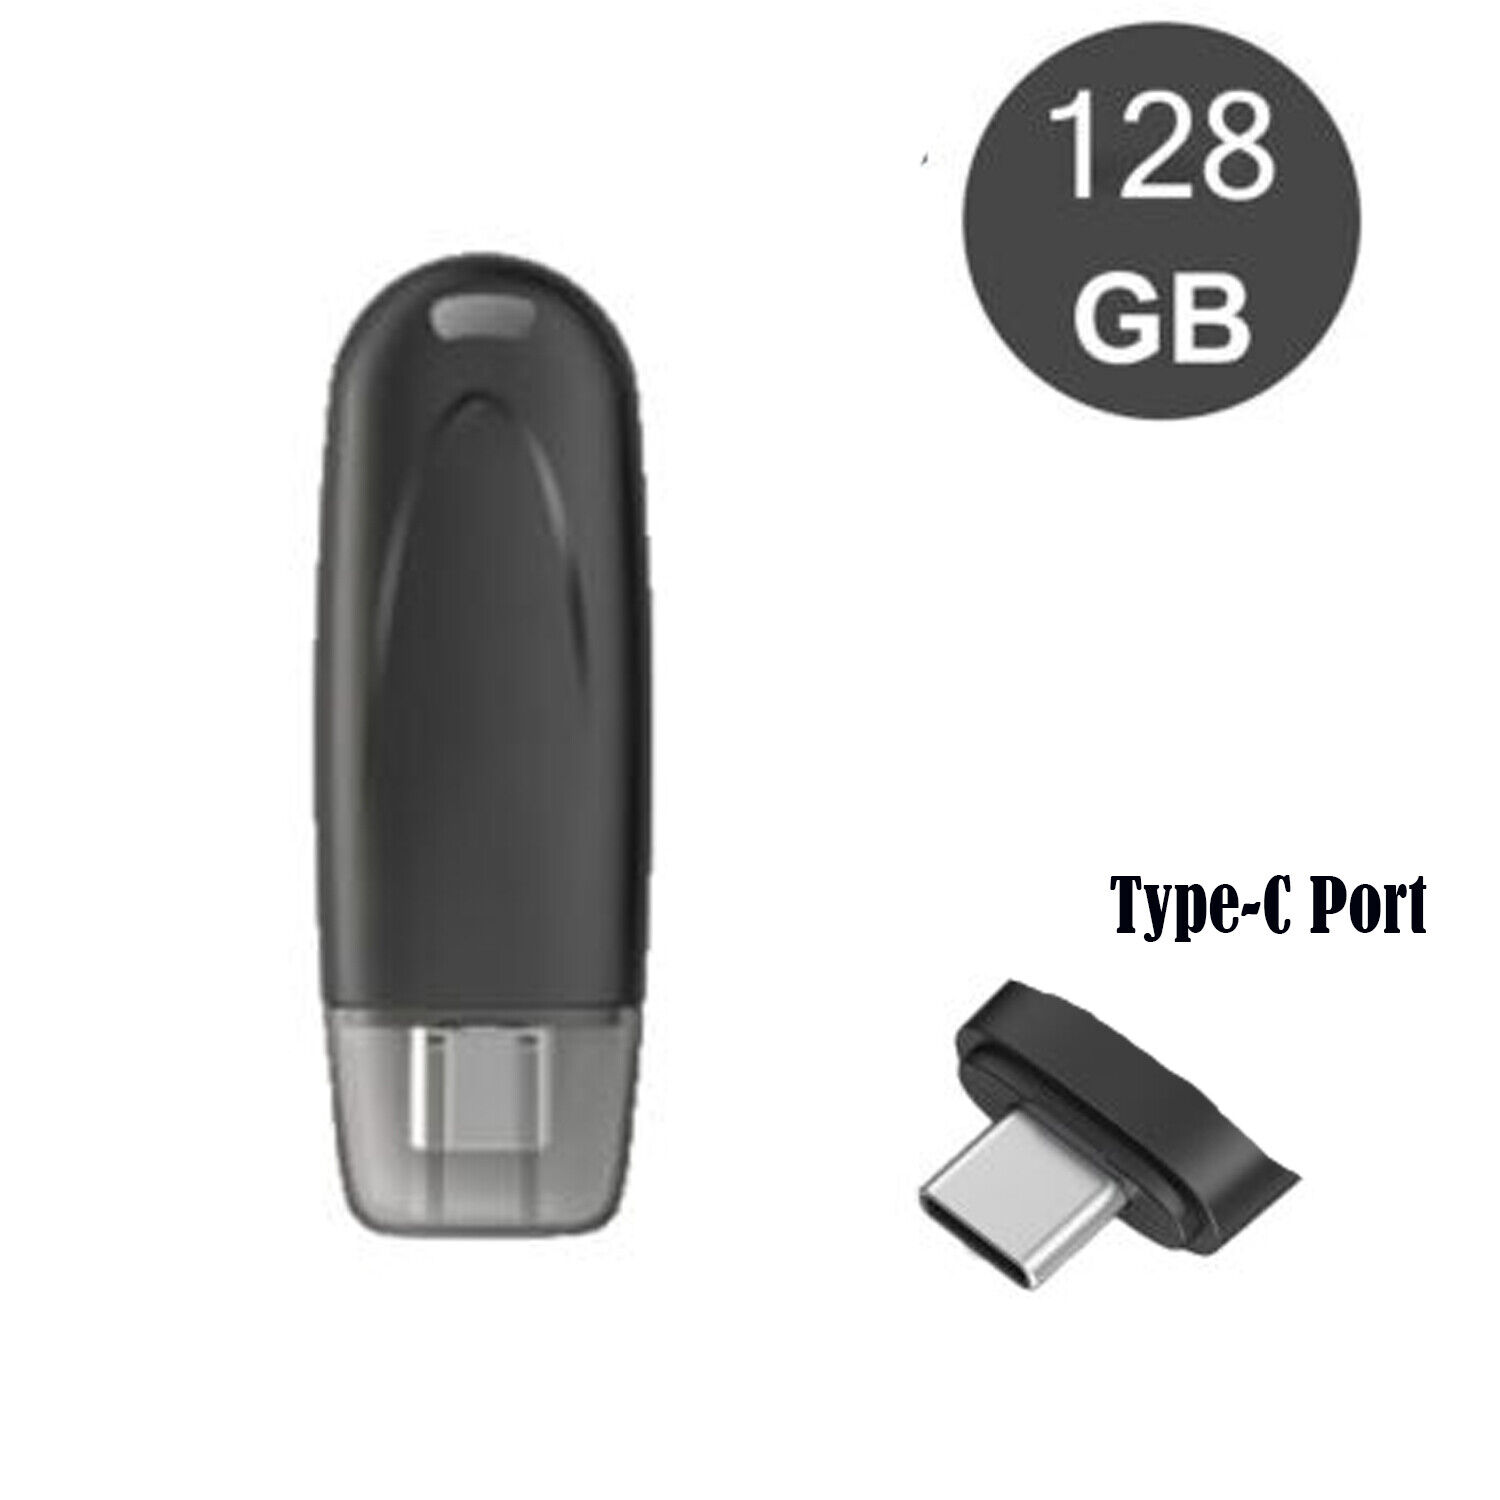 Kootion Type-C USB 2.0 128GB USB Flash Drive Memory For Samsung Android Phone PC